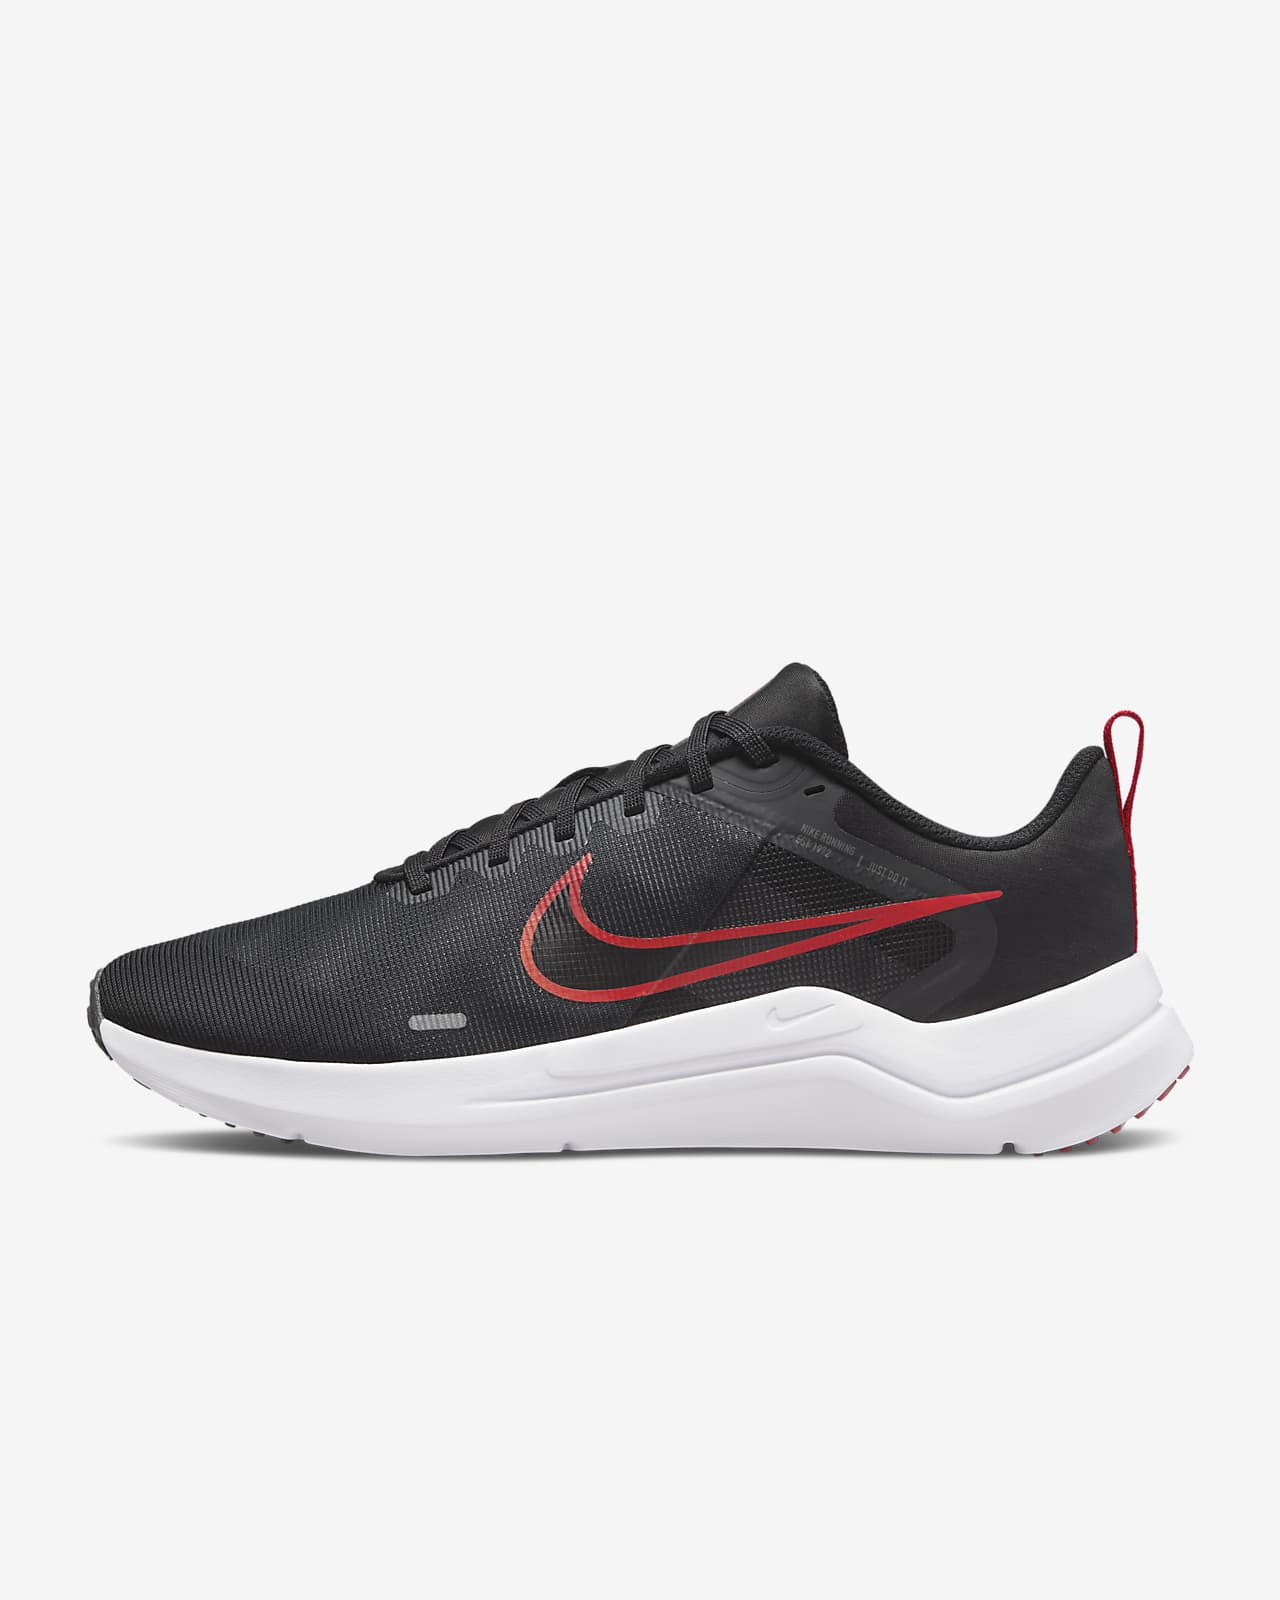 Red Mens Flex Experience 11 Running Shoe, Nike